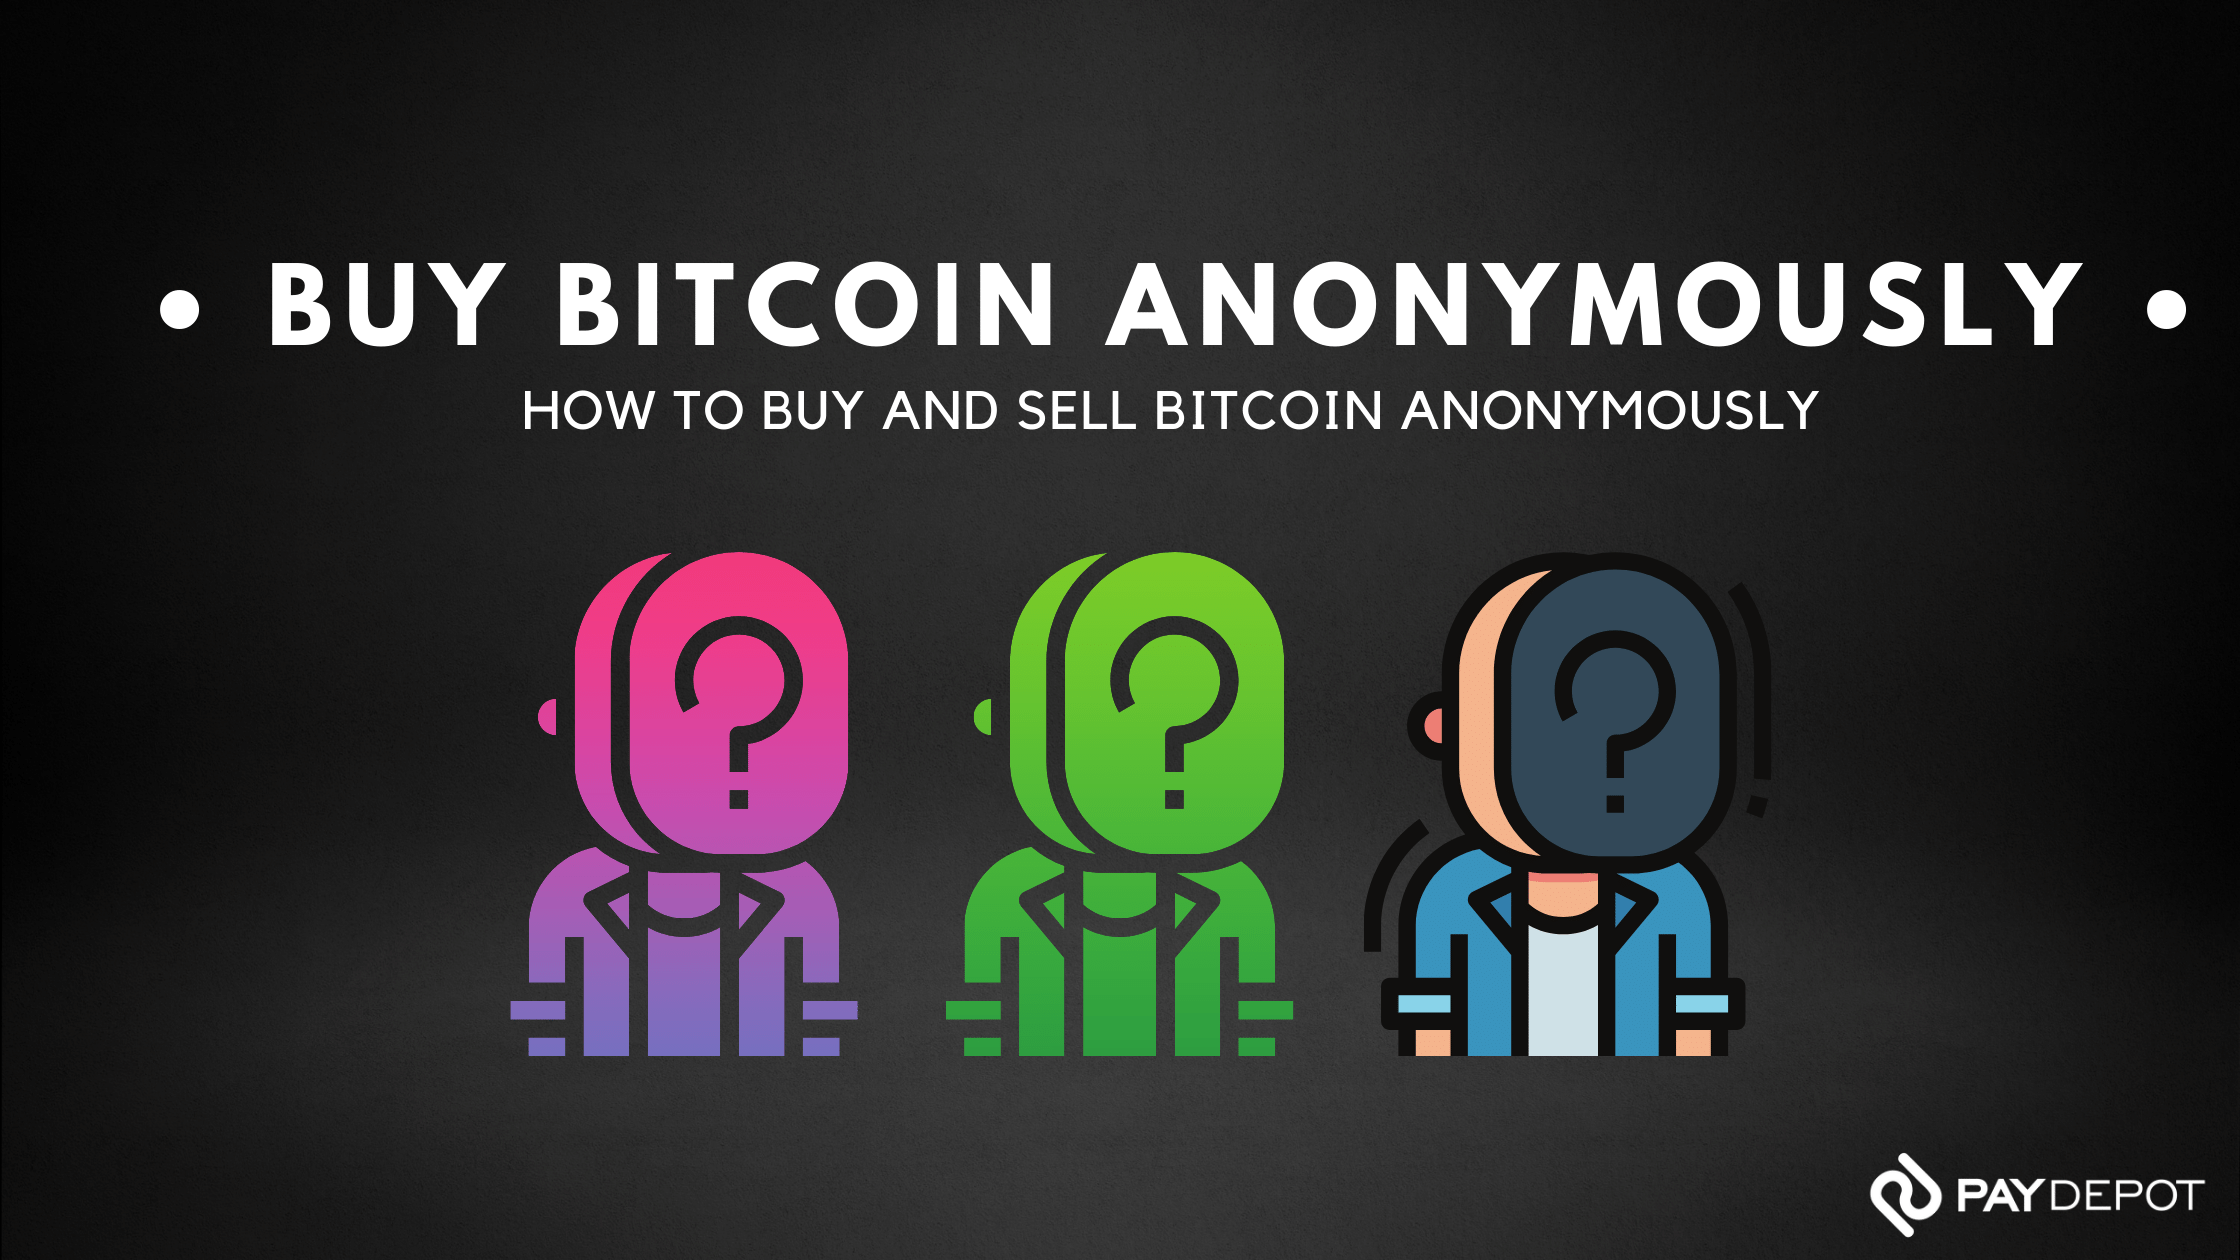 sell bitcoin anonymously reddit